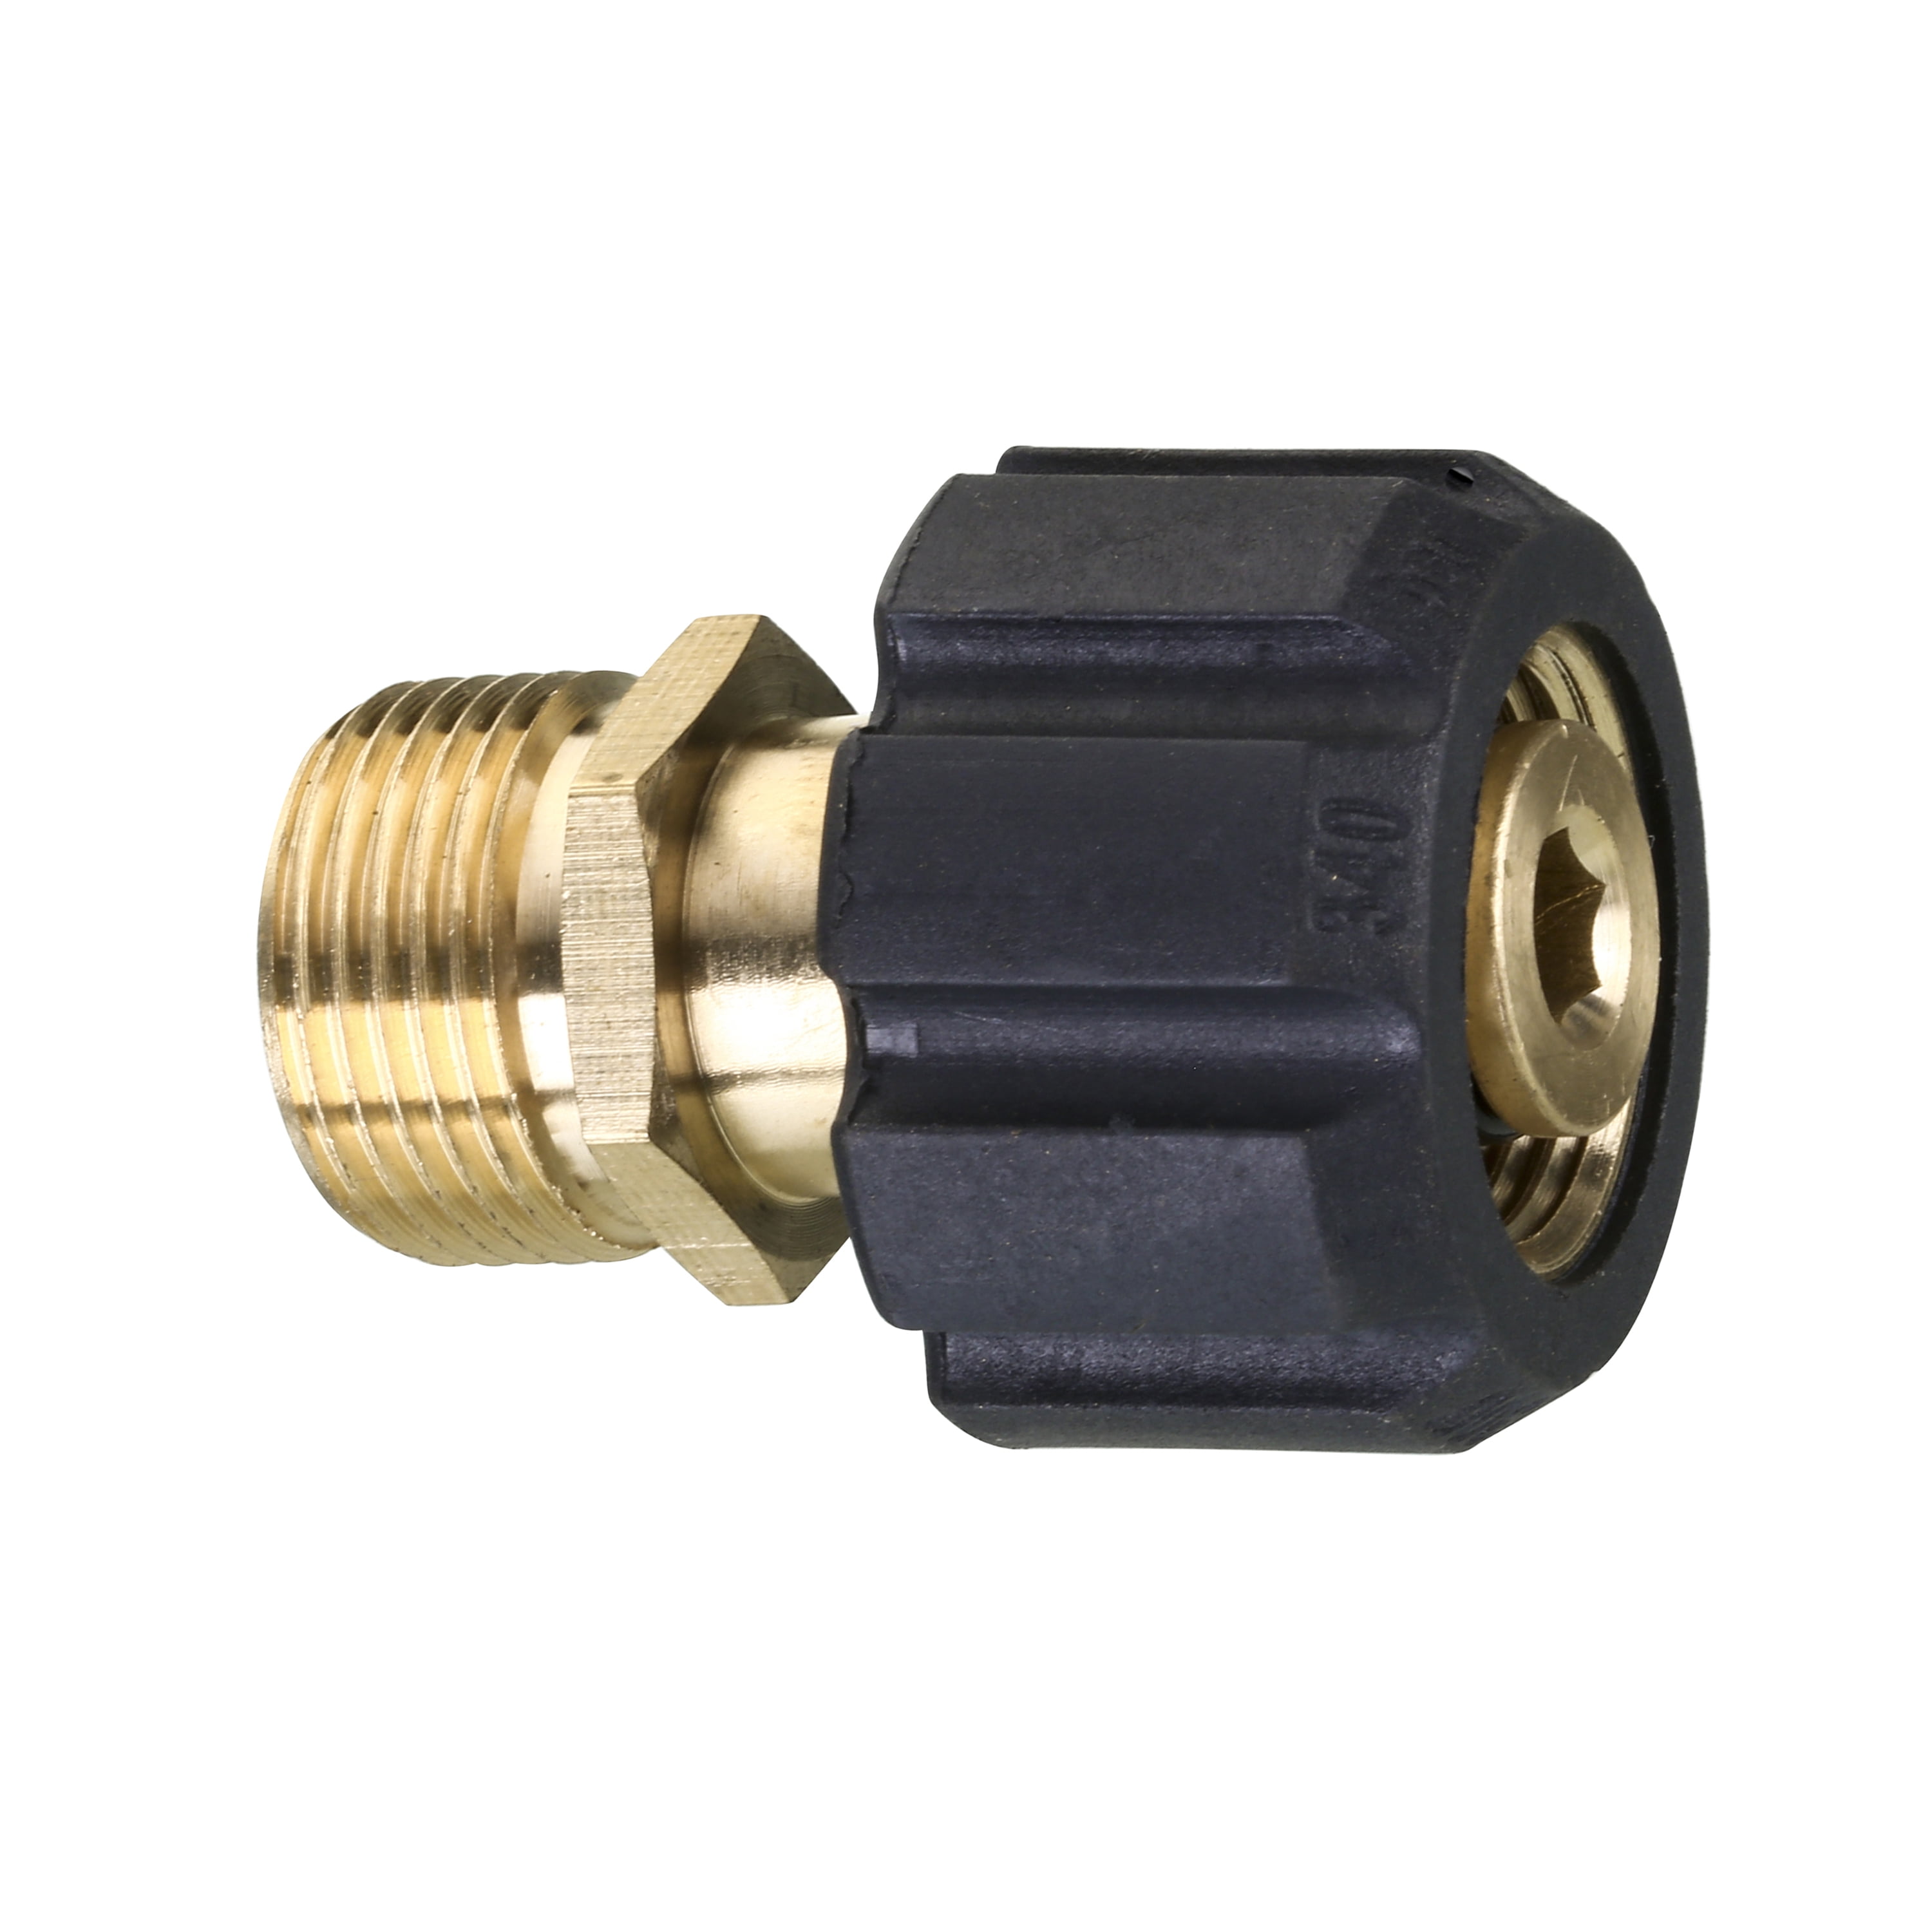 High Pressure Washer Coupler M22 15mm Male to M22 14mm Female Thread Connector 